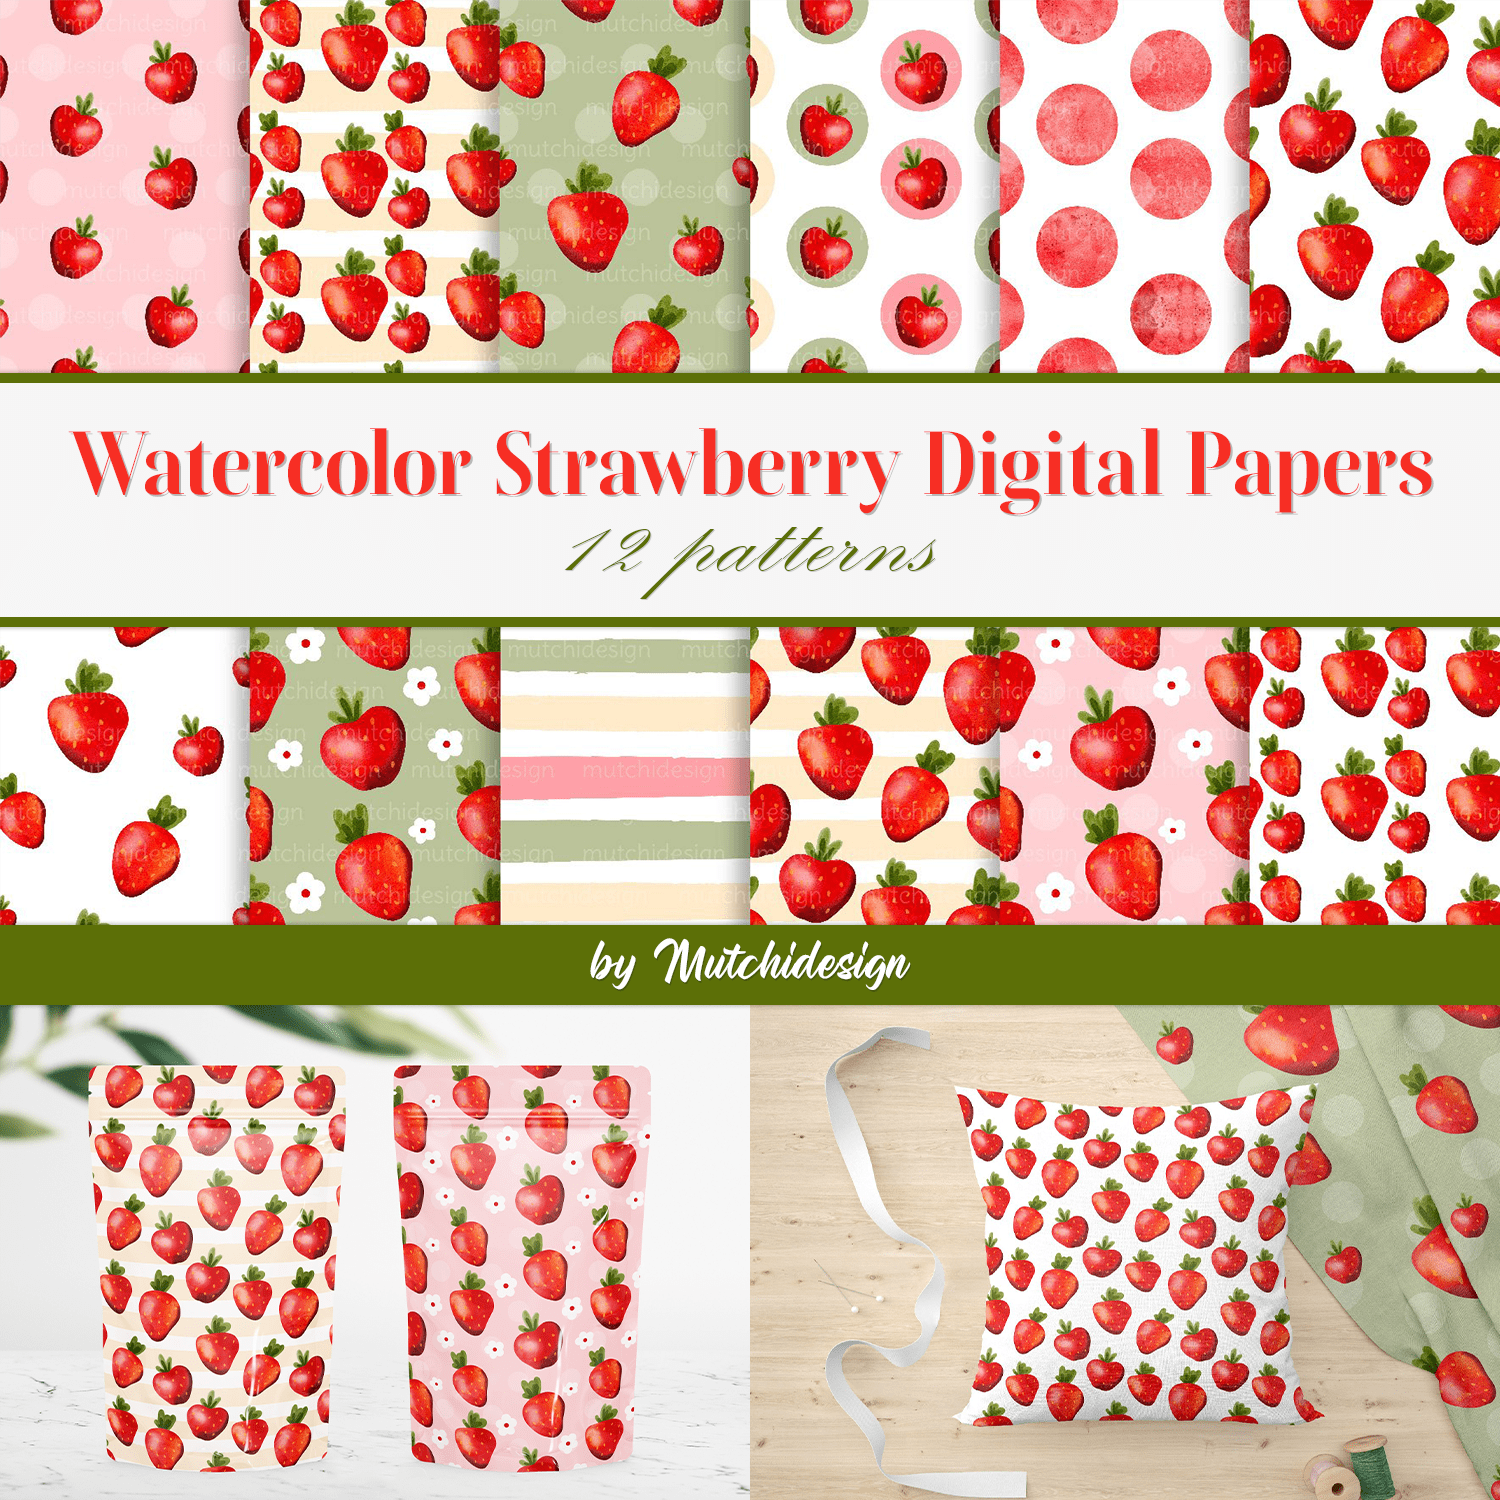 Watercolor Strawberry Digital Papers - main image preview.